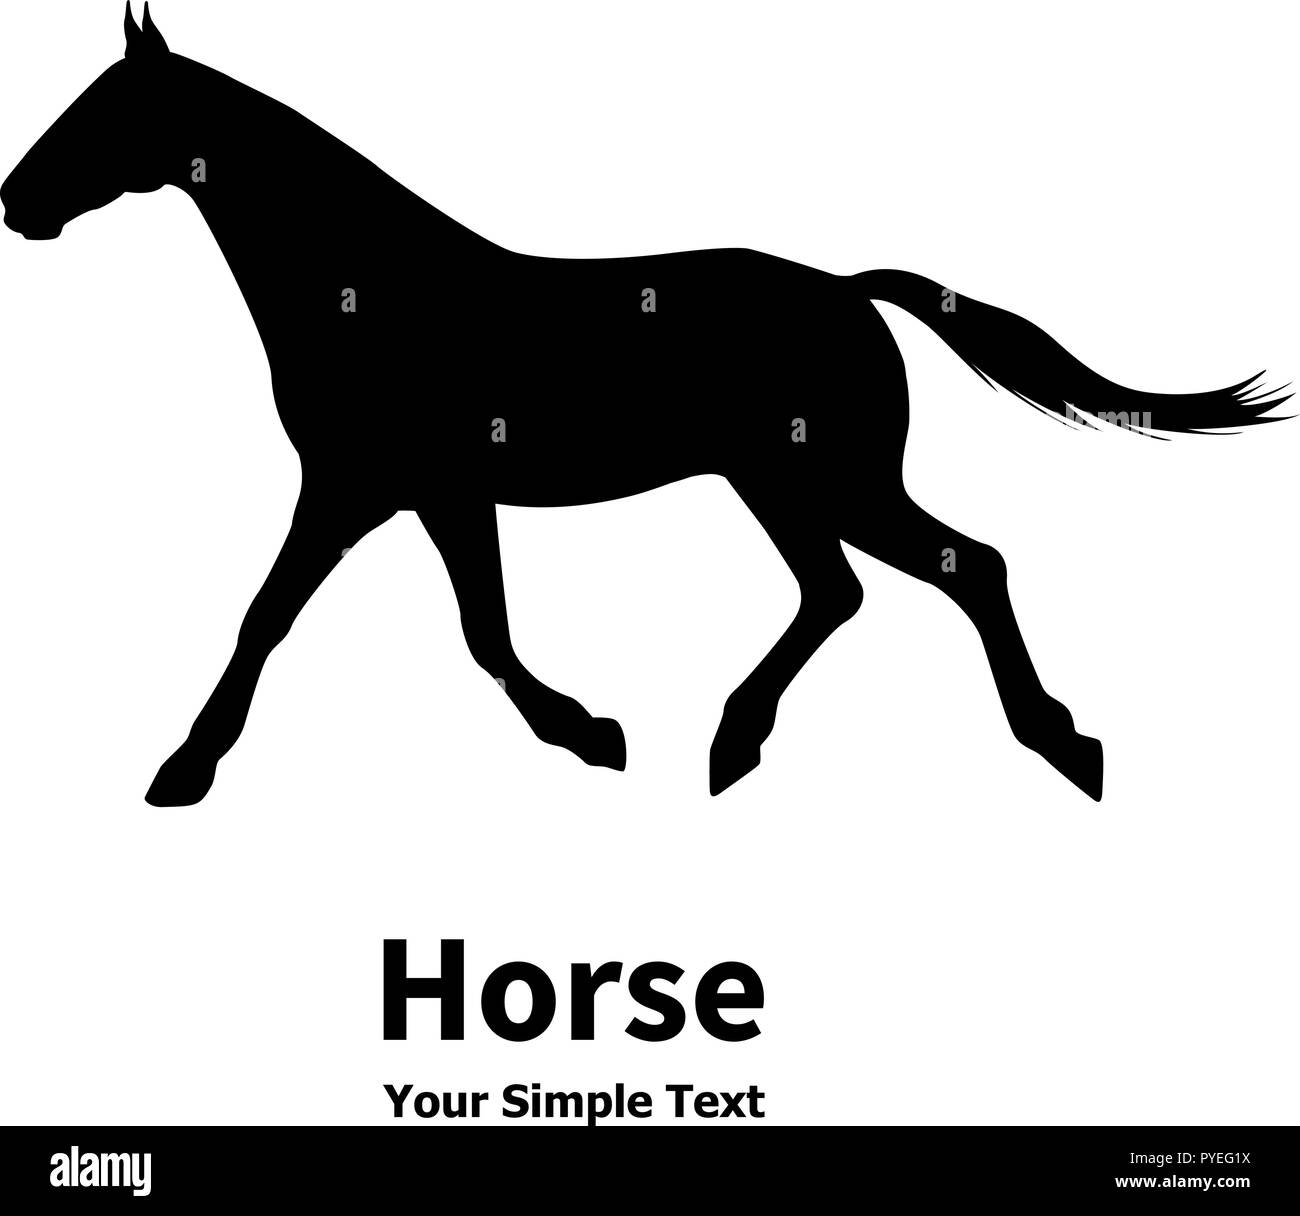 Vector illustration of a silhouette of a running horse Stock Vector